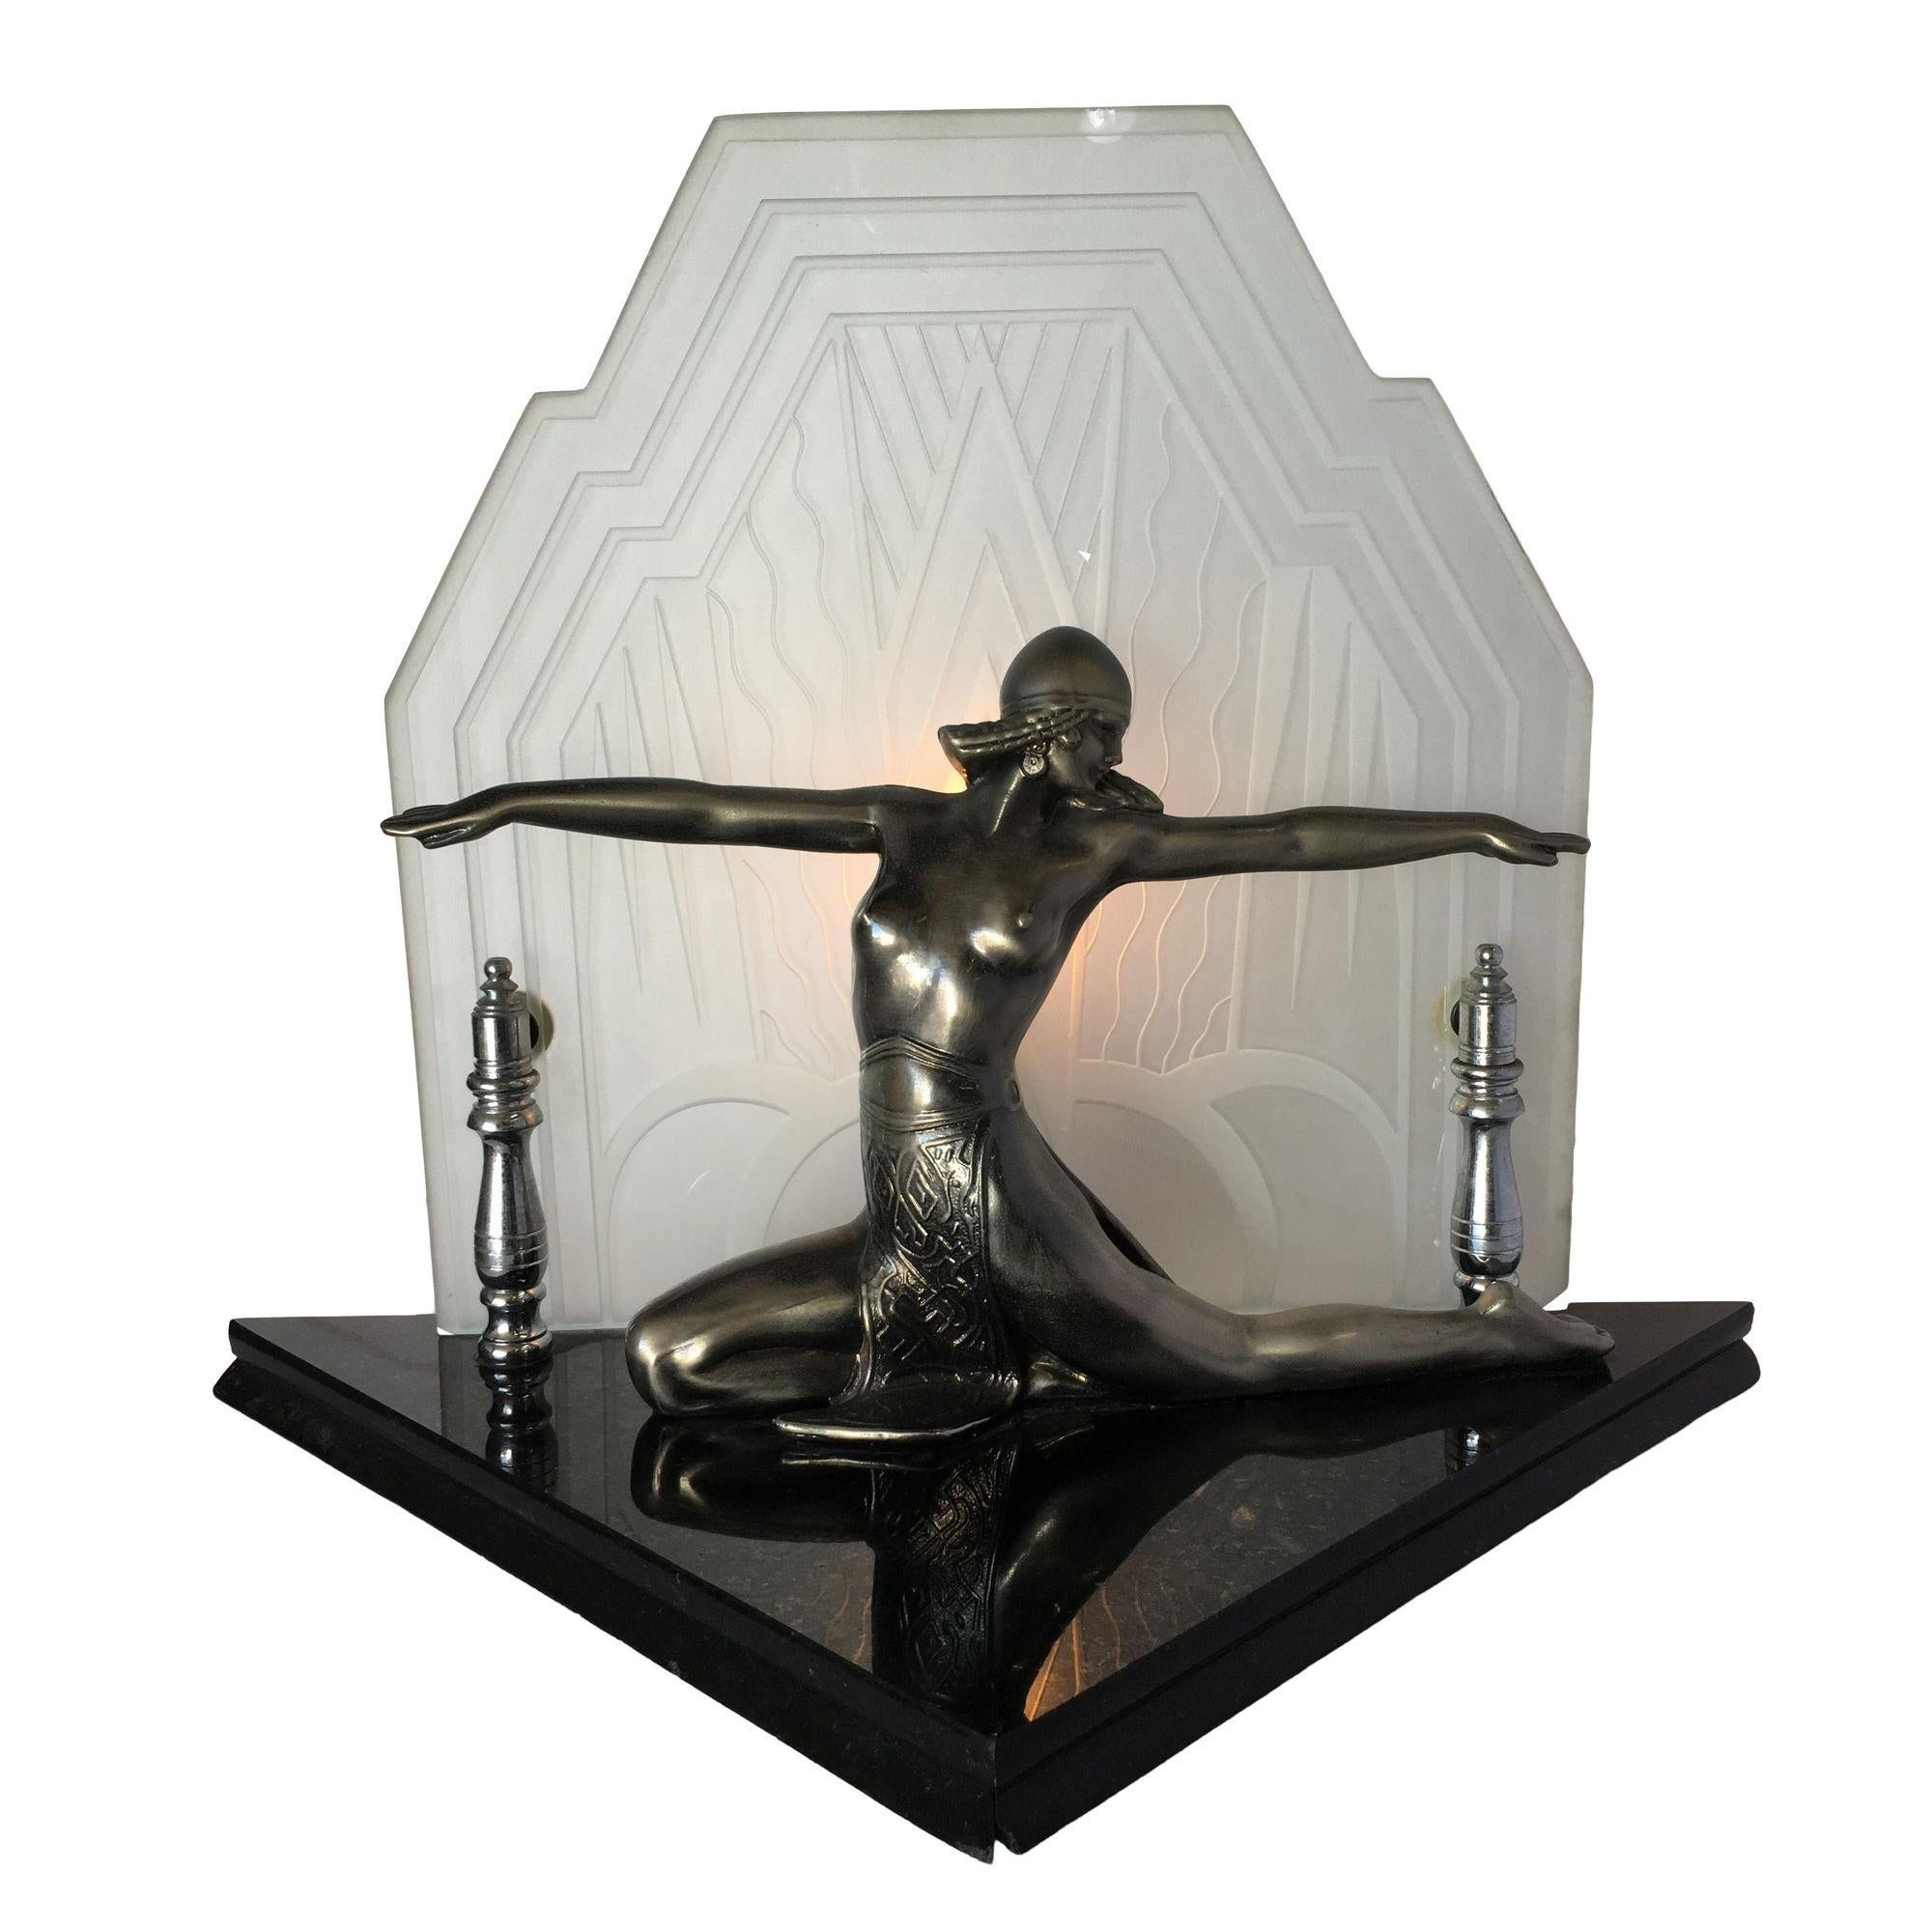 American Art Deco Revival Chrome Art Deco Cleopatra Lamp with Etched Glass Shade For Sale